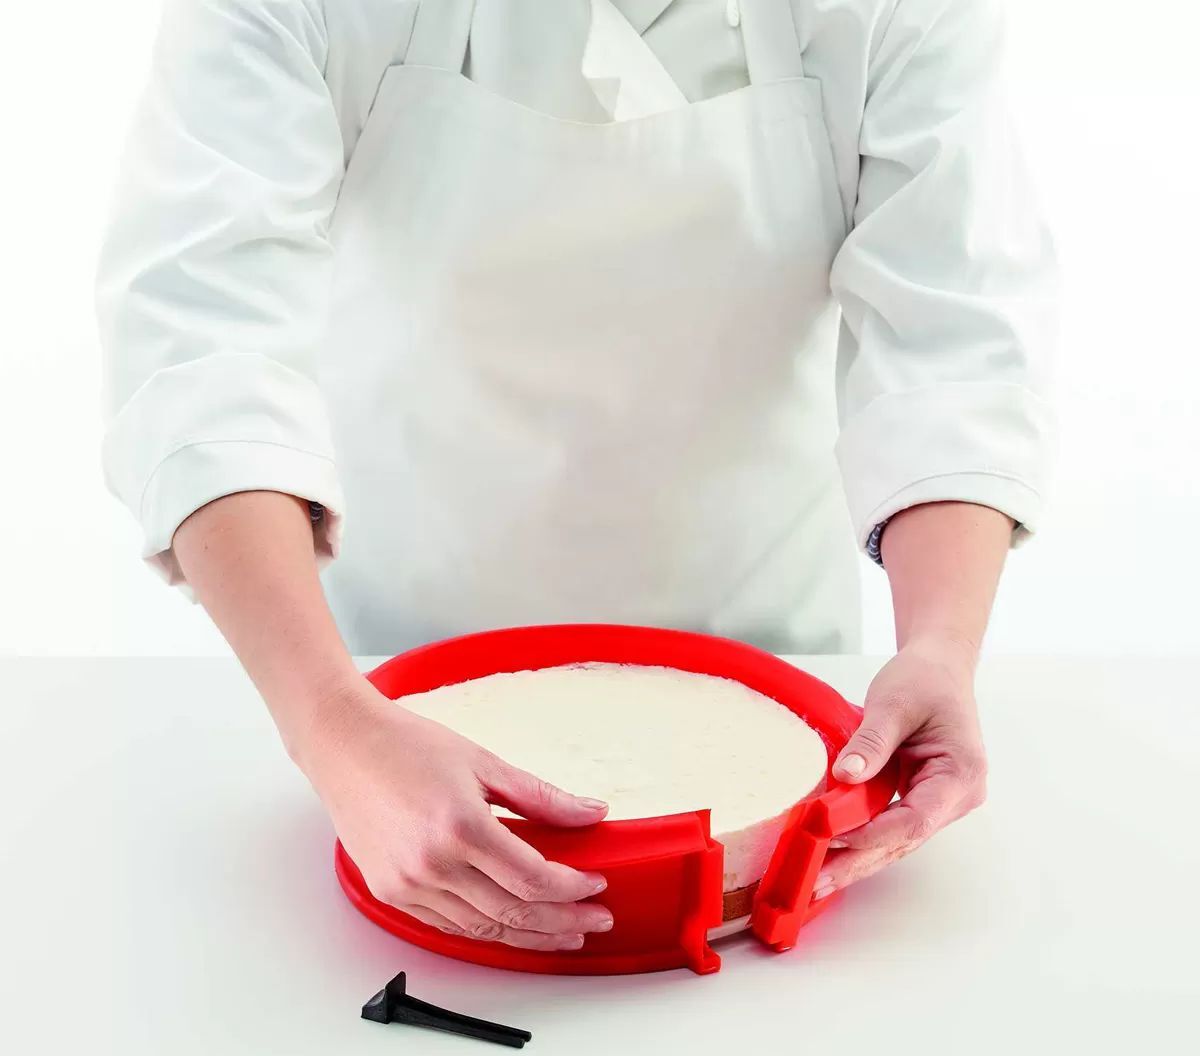 perfect pan - 9 Springform Pan - Removable base with Silicone Ring